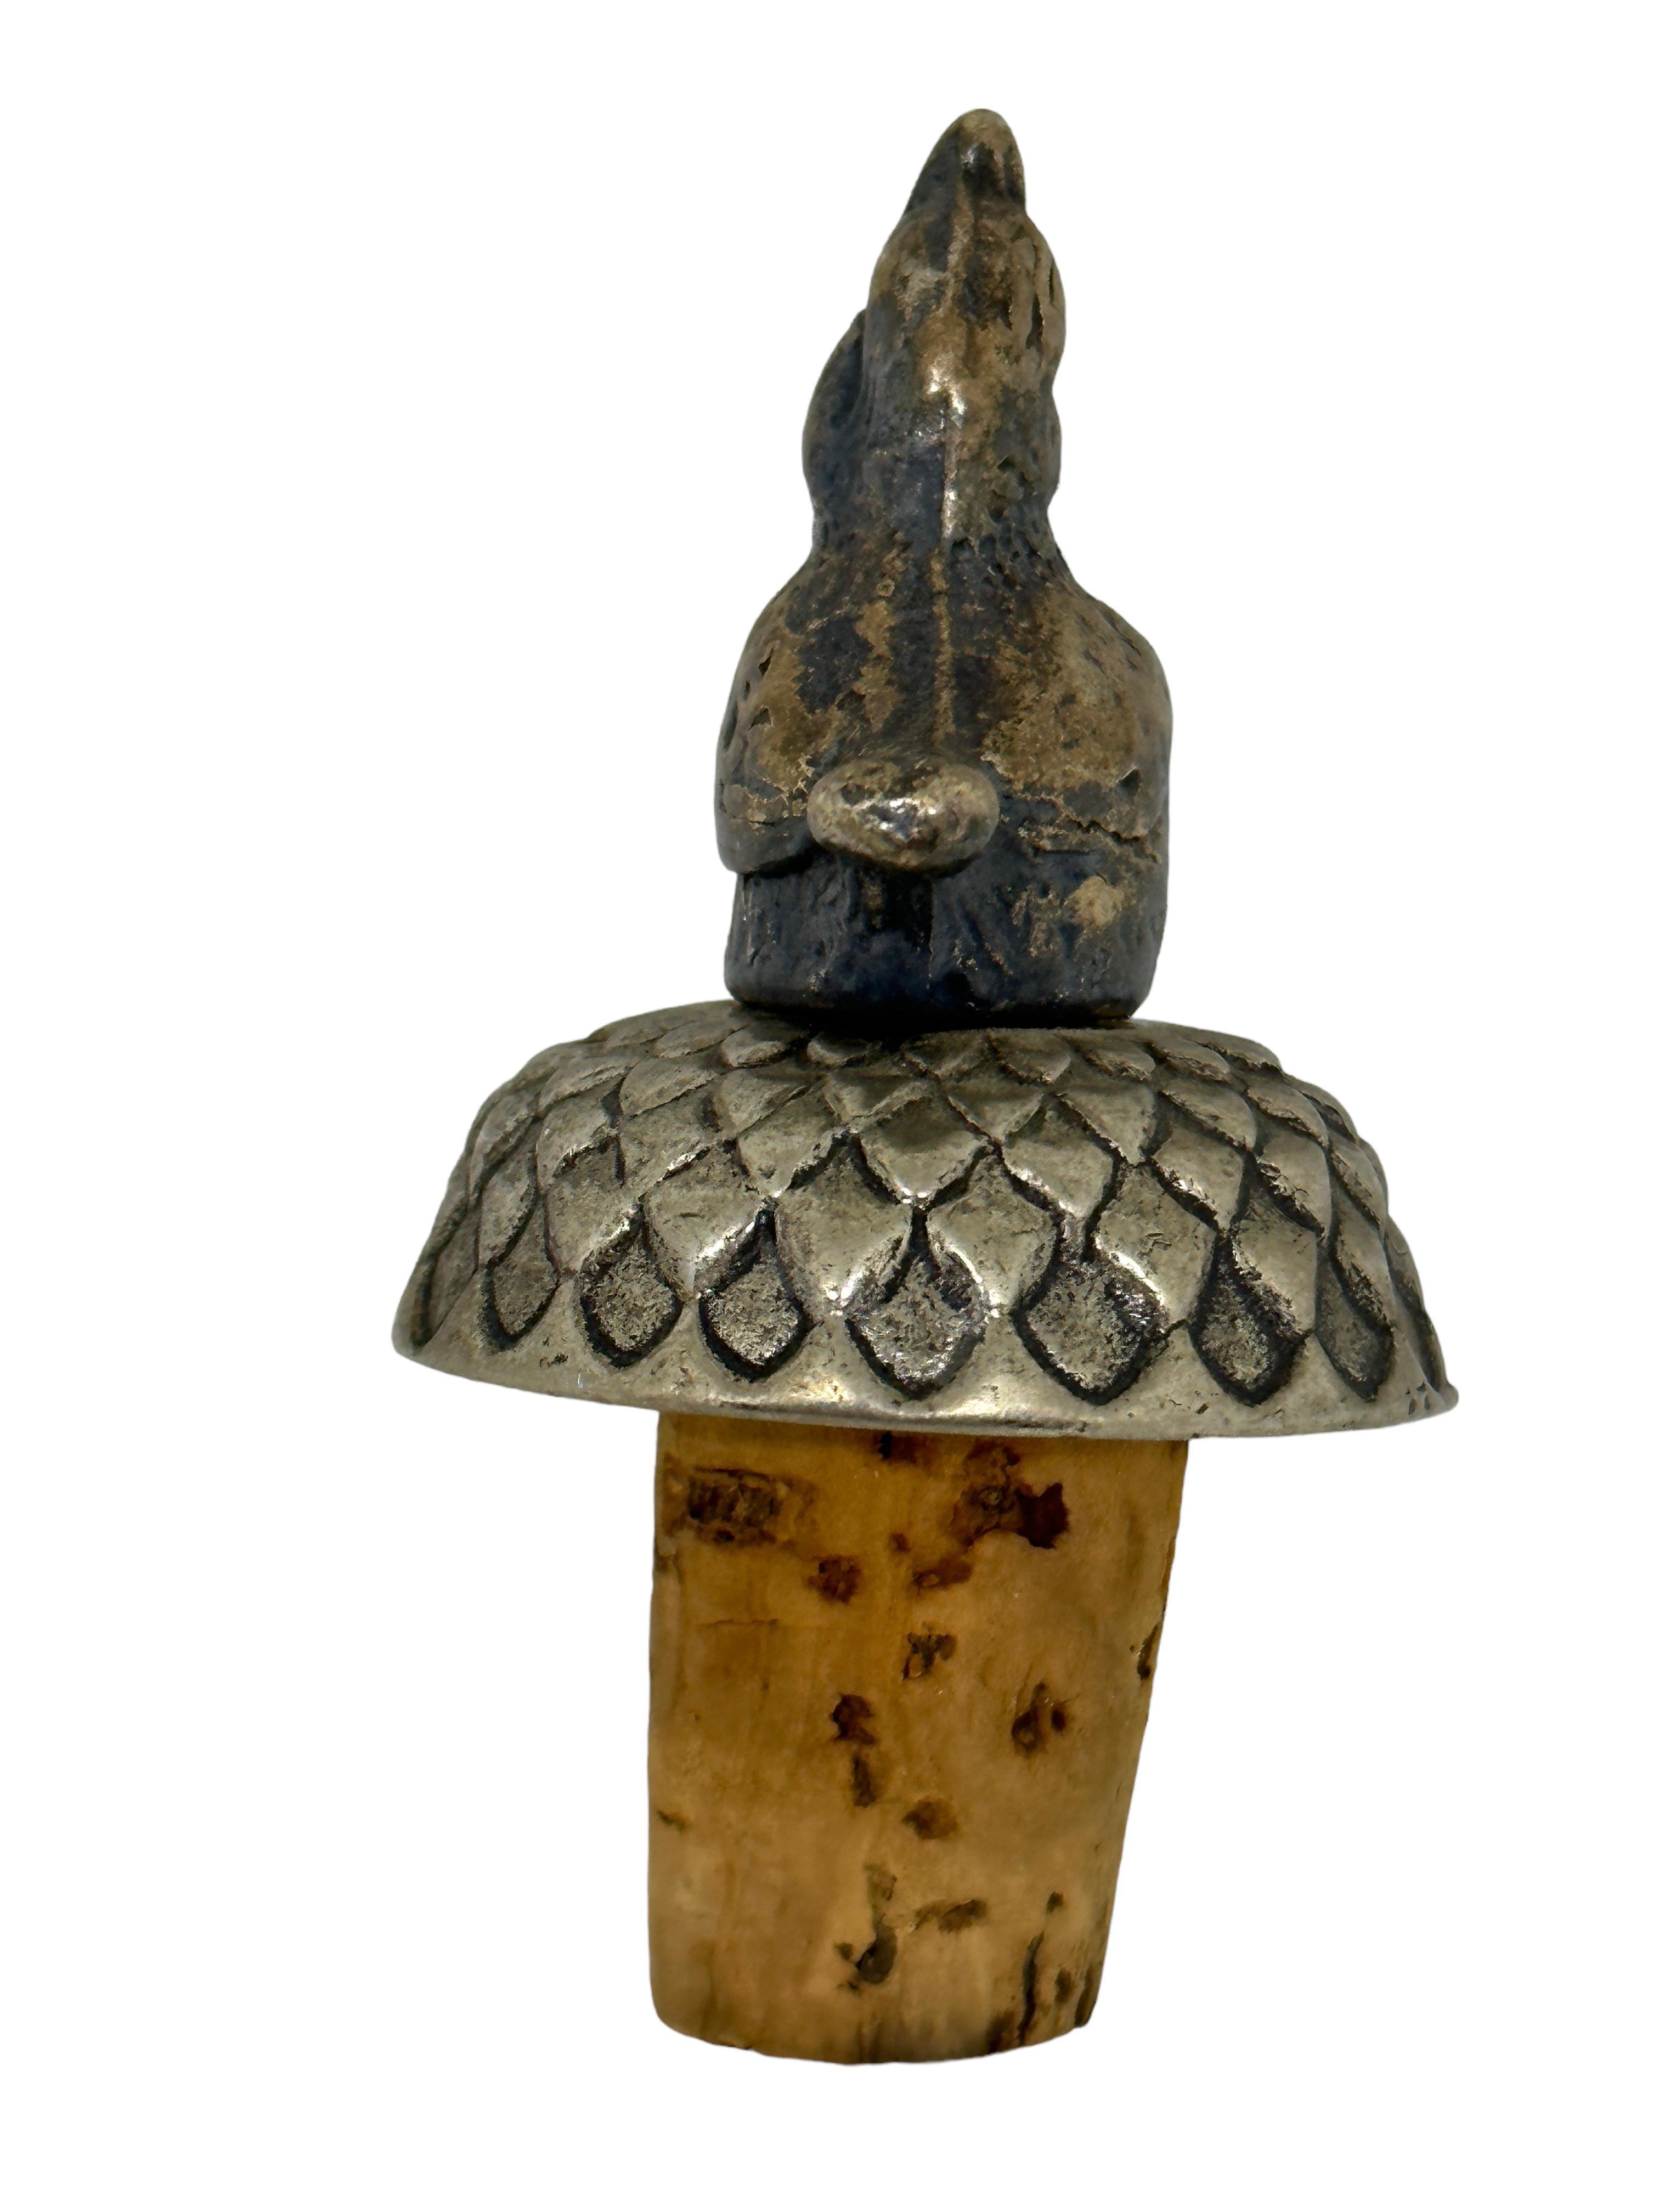 A beautiful metal and cork bottle stopper. Some wear with a nice patina, but this is old-age. Made of metal and cork, silver plated. A beautiful nice barware item or just a display item in your collections of antique and vintage bottle stoppers.